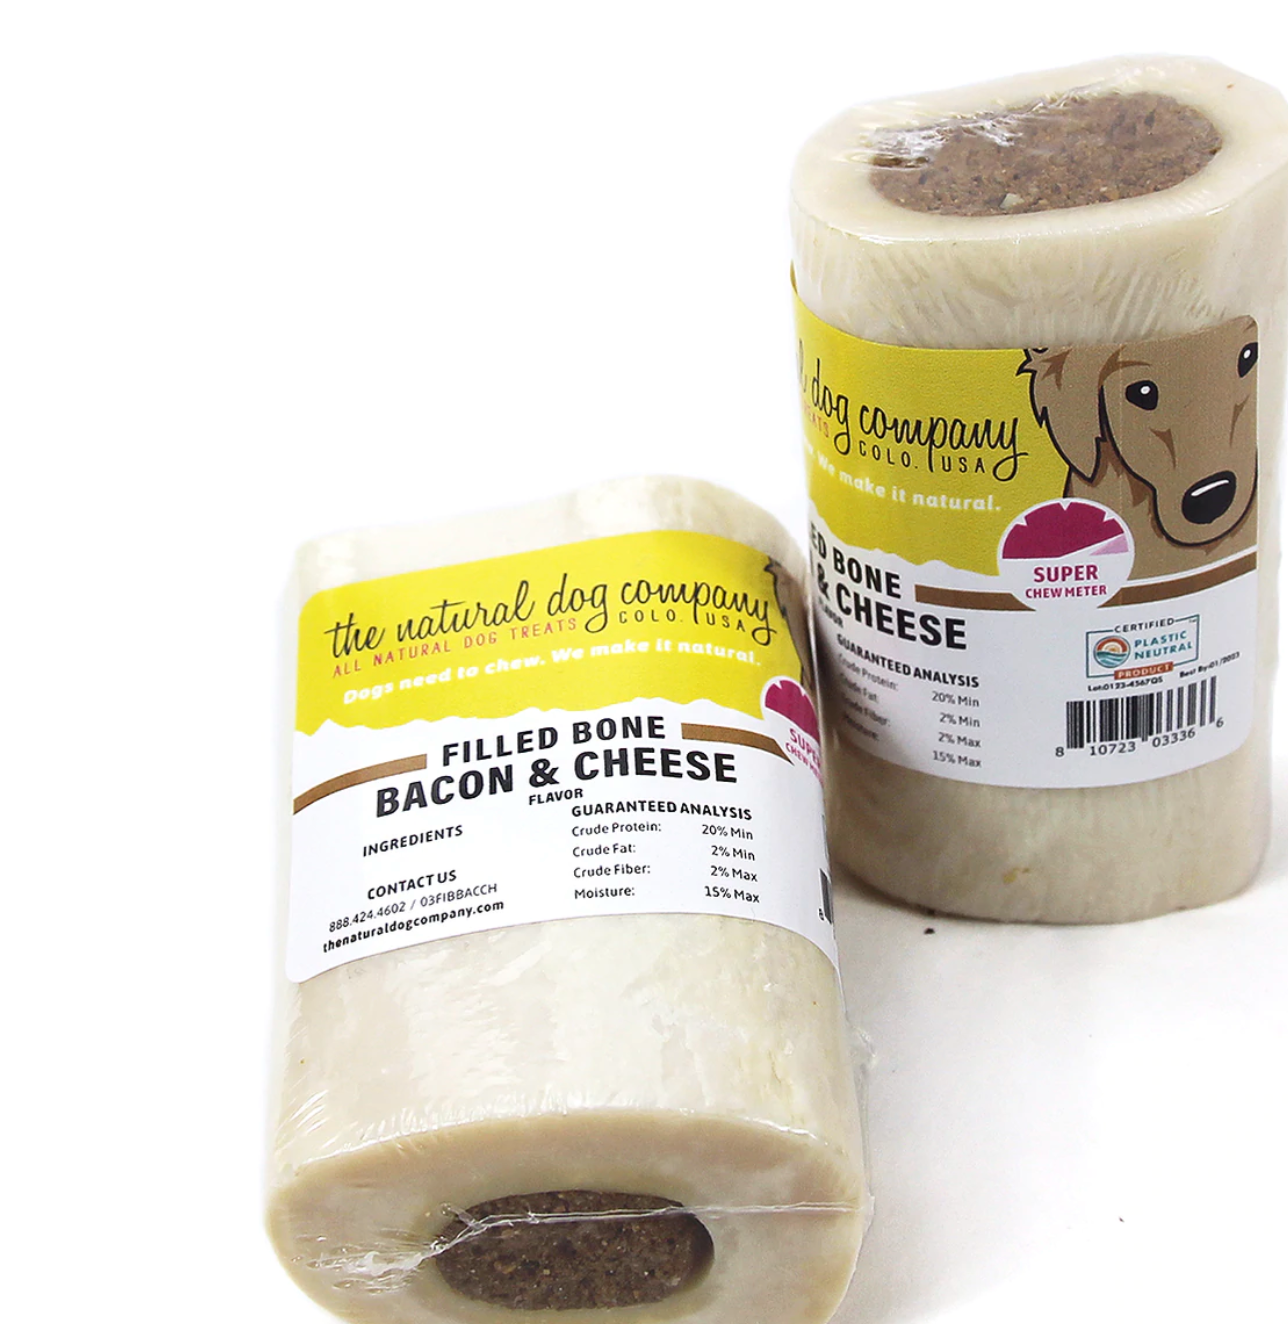 Tuesday's Natural Dog Company 3" Filled Bone - Bacon and Cheese Flavor